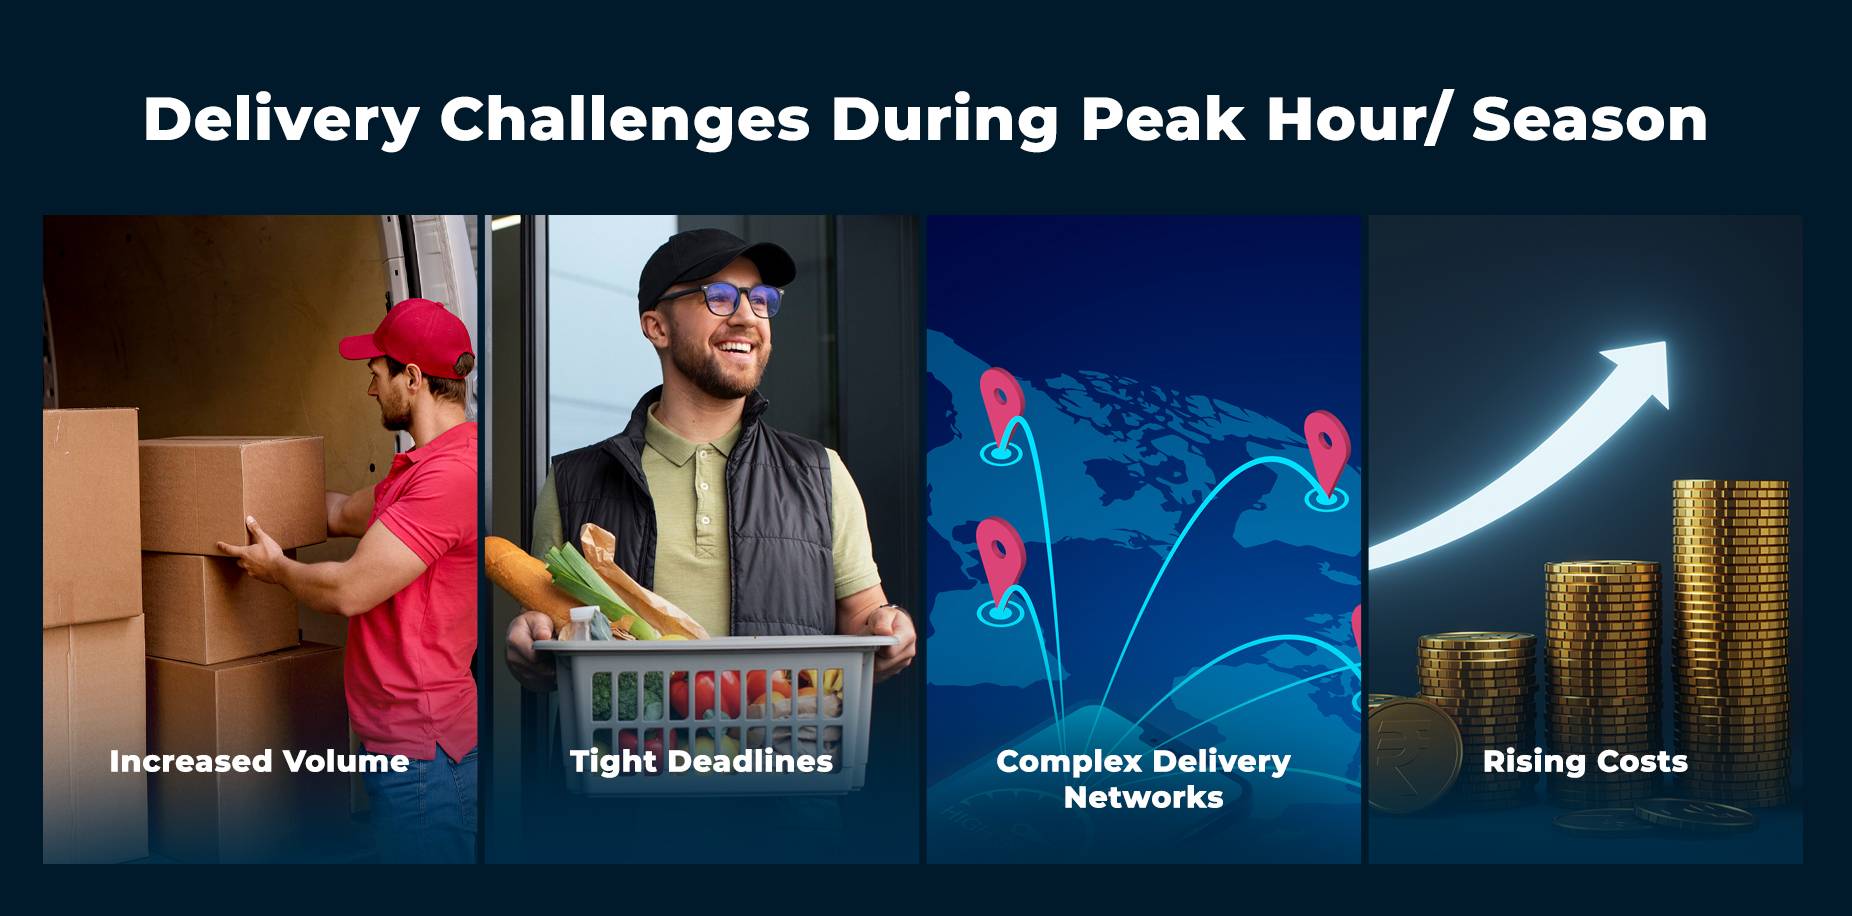 What are peak season or peak hour delivery challenges?